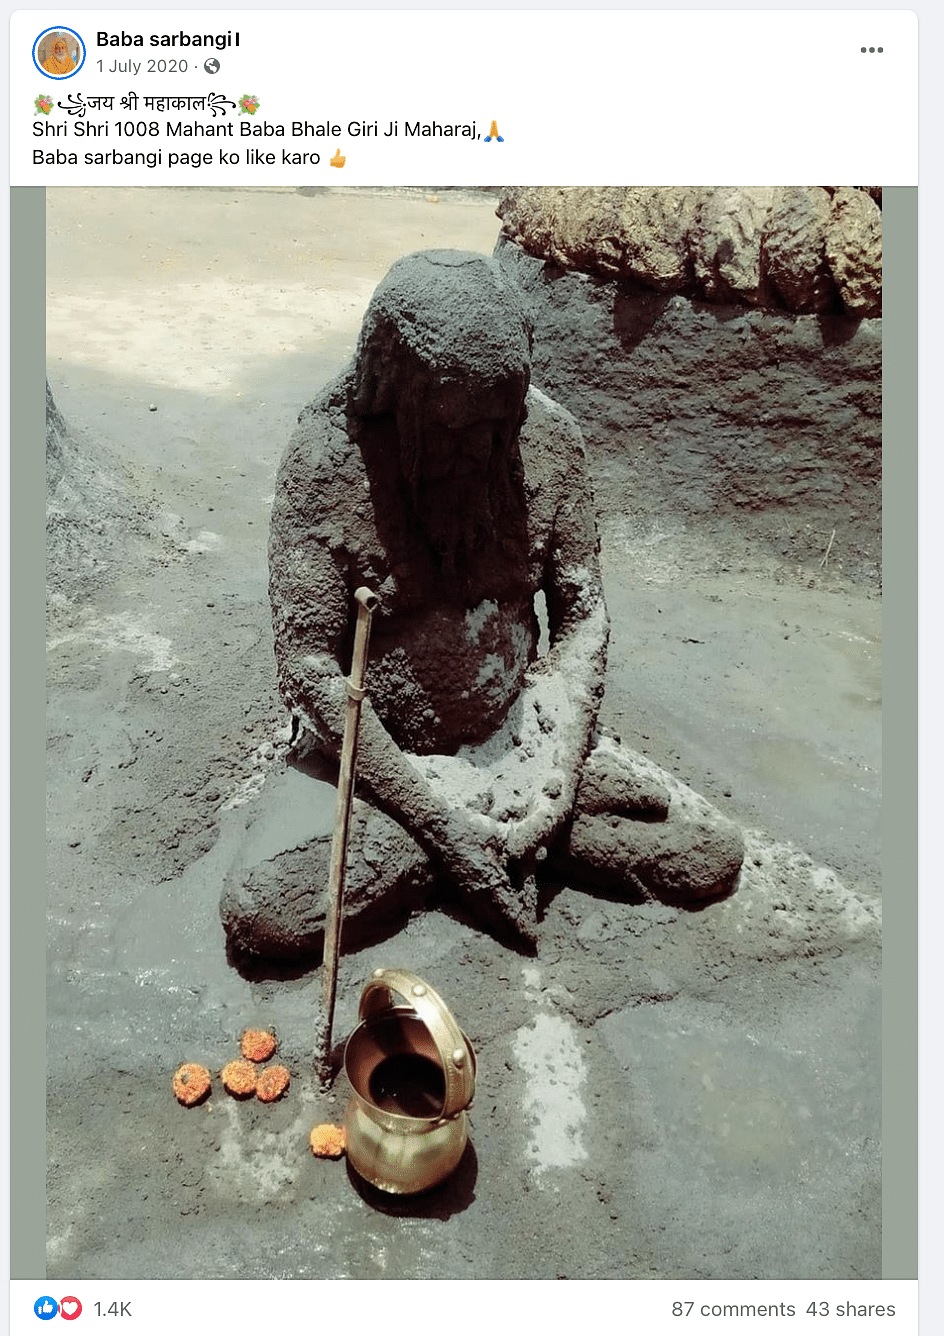 The seer seen in the photo is Bhale Giriji Maharaj from Haryana who performs a ritual around fire. 